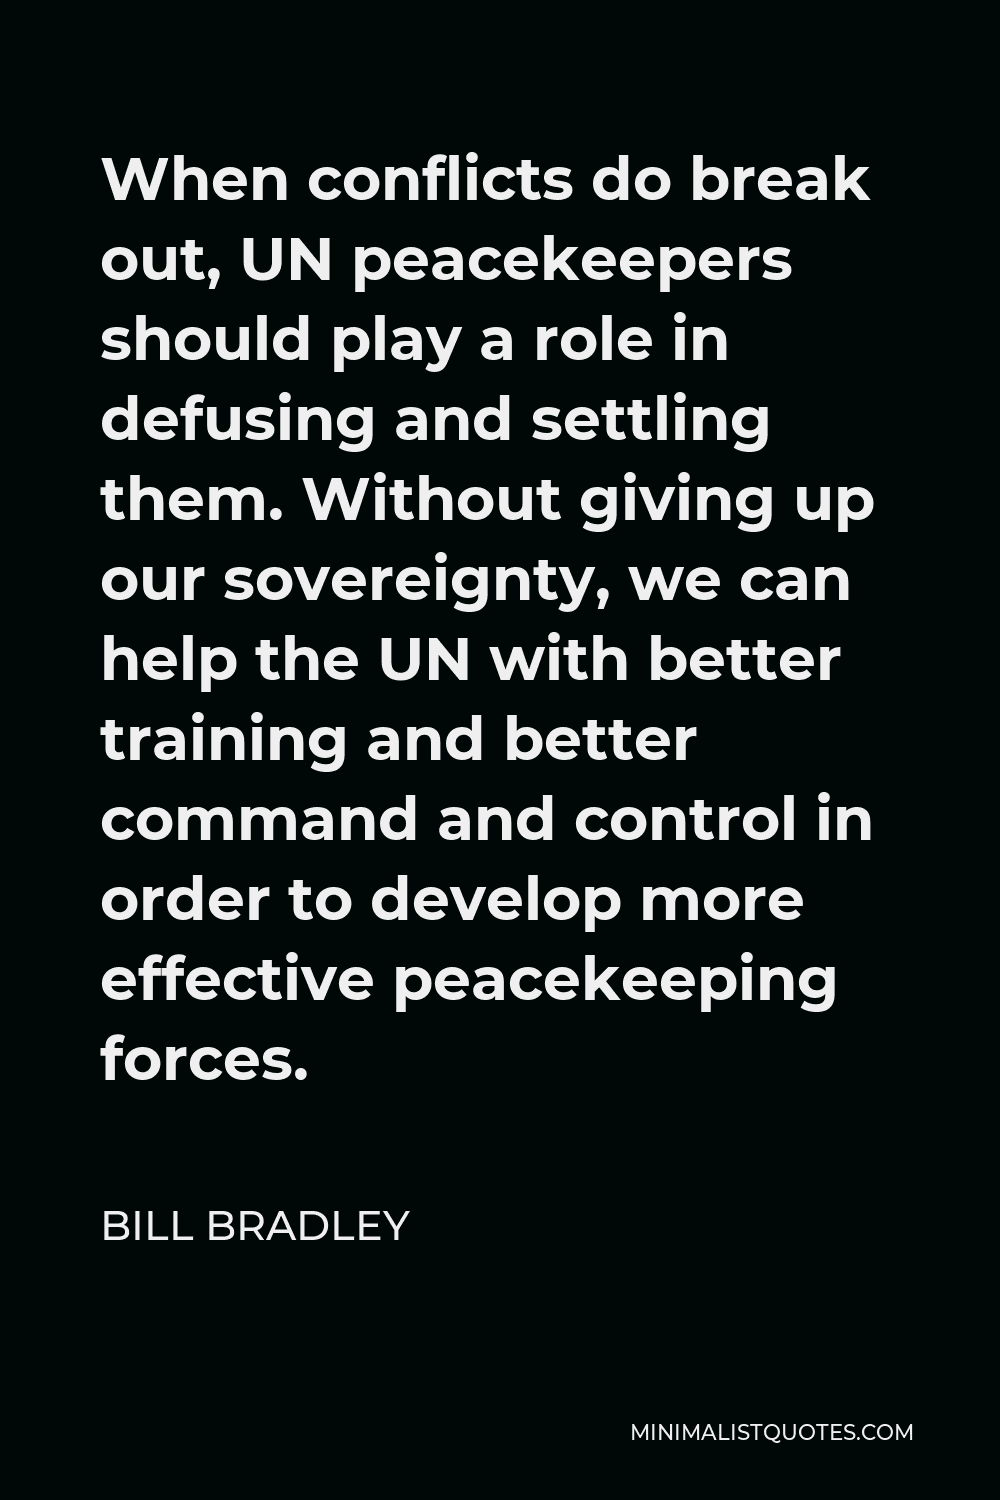 Bill Bradley Quote - When conflicts do break out, UN peacekeepers should play a role in defusing and settling them. Without giving up our sovereignty, we can help the UN with better training and better command and control in order to develop more effective peacekeeping forces.